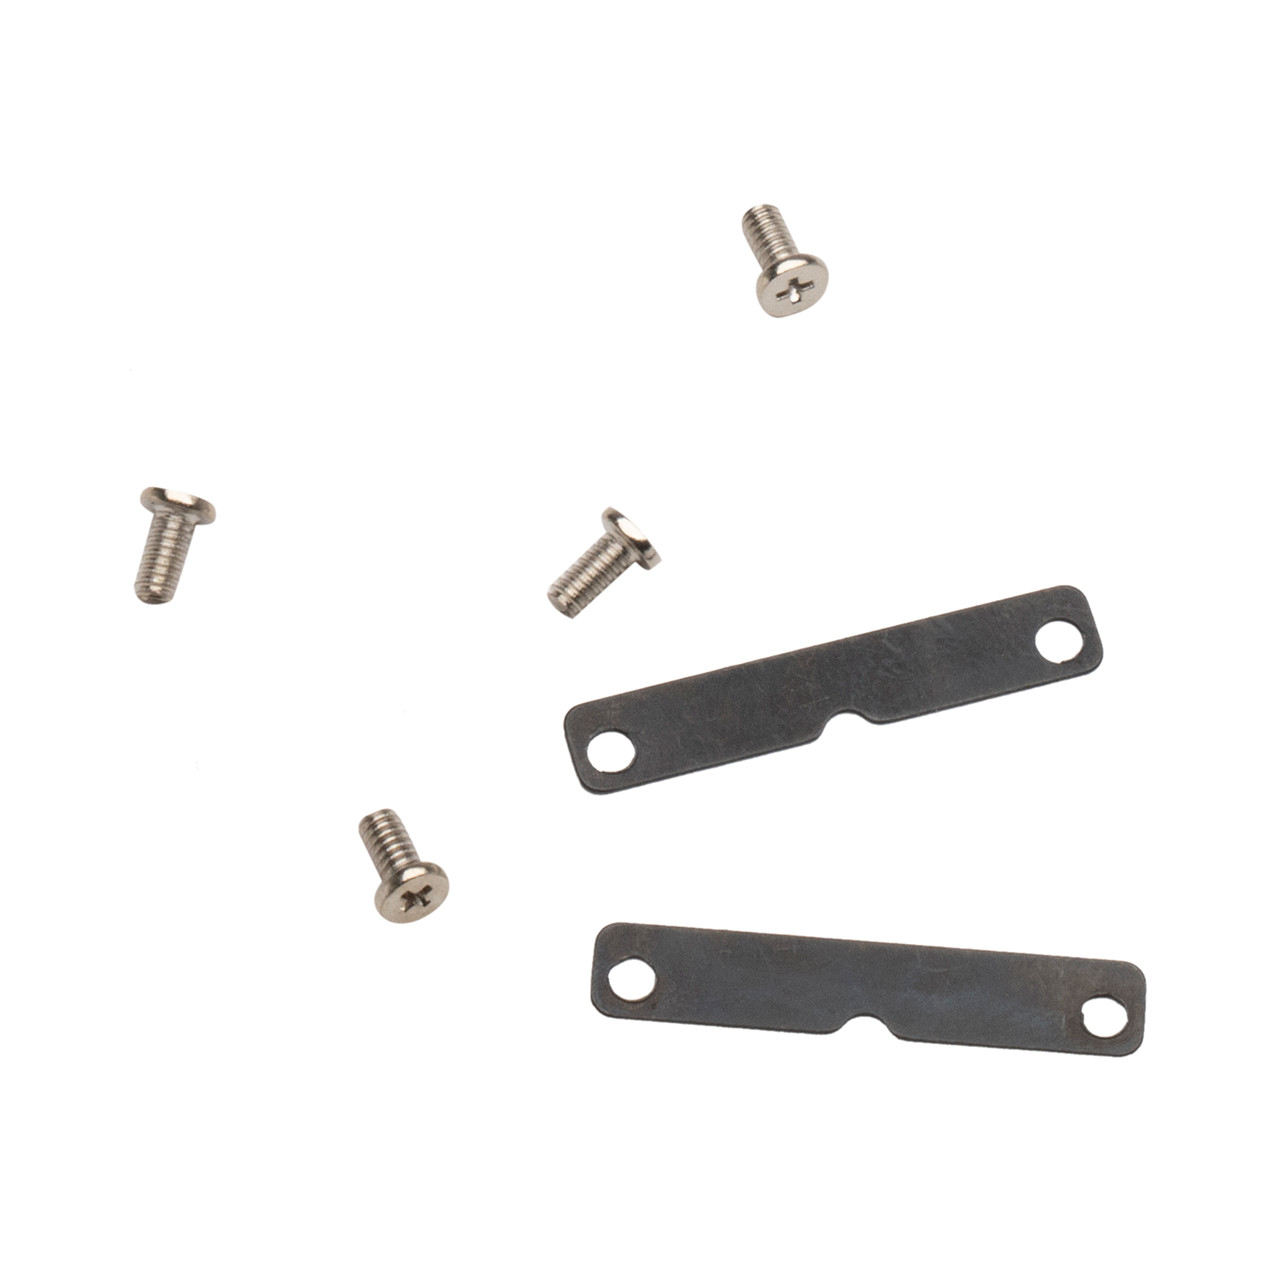 Shop Gearbox Bolt Plate Guide Assembly - $ 6 - Krytac.com | For Airsoft Use Only.